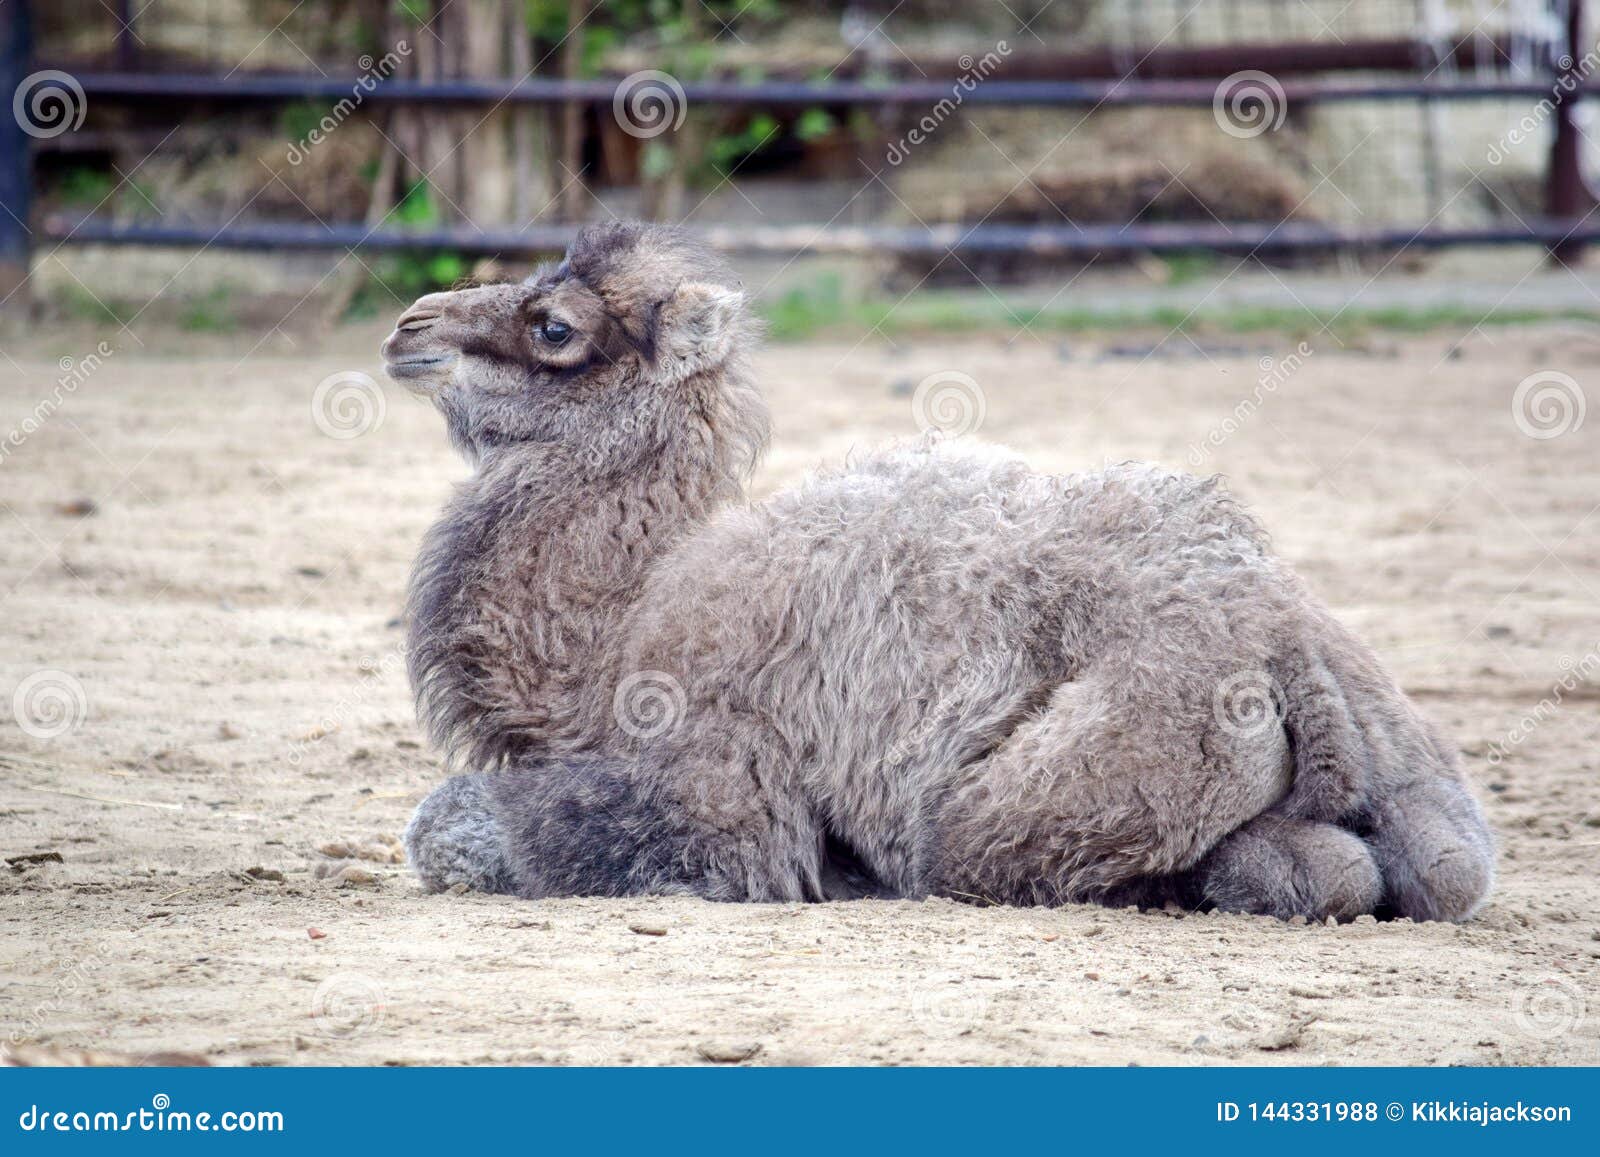 Small Baby Camel Portrait Camelus Bactrianus Resting Stock Photo ...